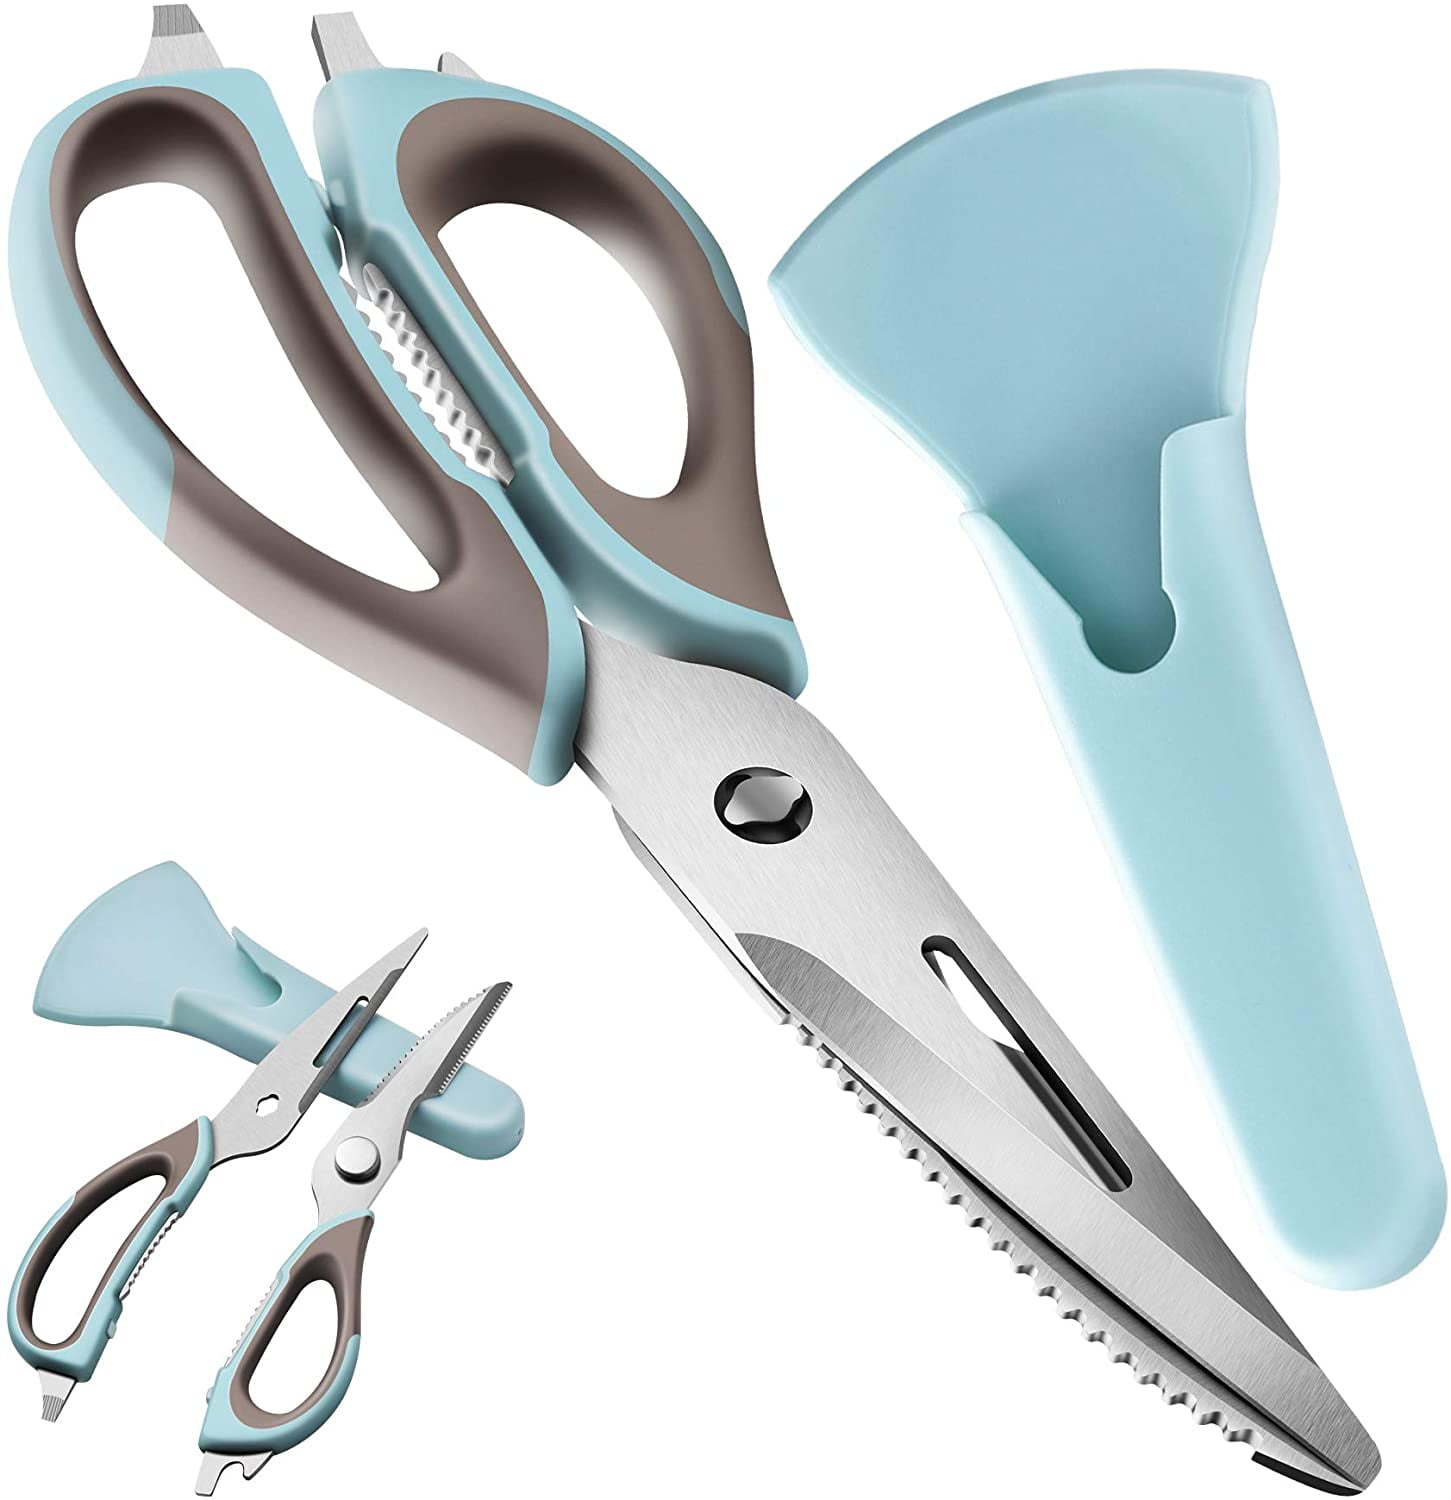 GUMIFOTNE Kitchen Scissors for Cutting Meat,vegetables,etc.Korean Barbecue  Shear and tongs set,BBQ scissors and clip,Ergonomic Stainless Steel